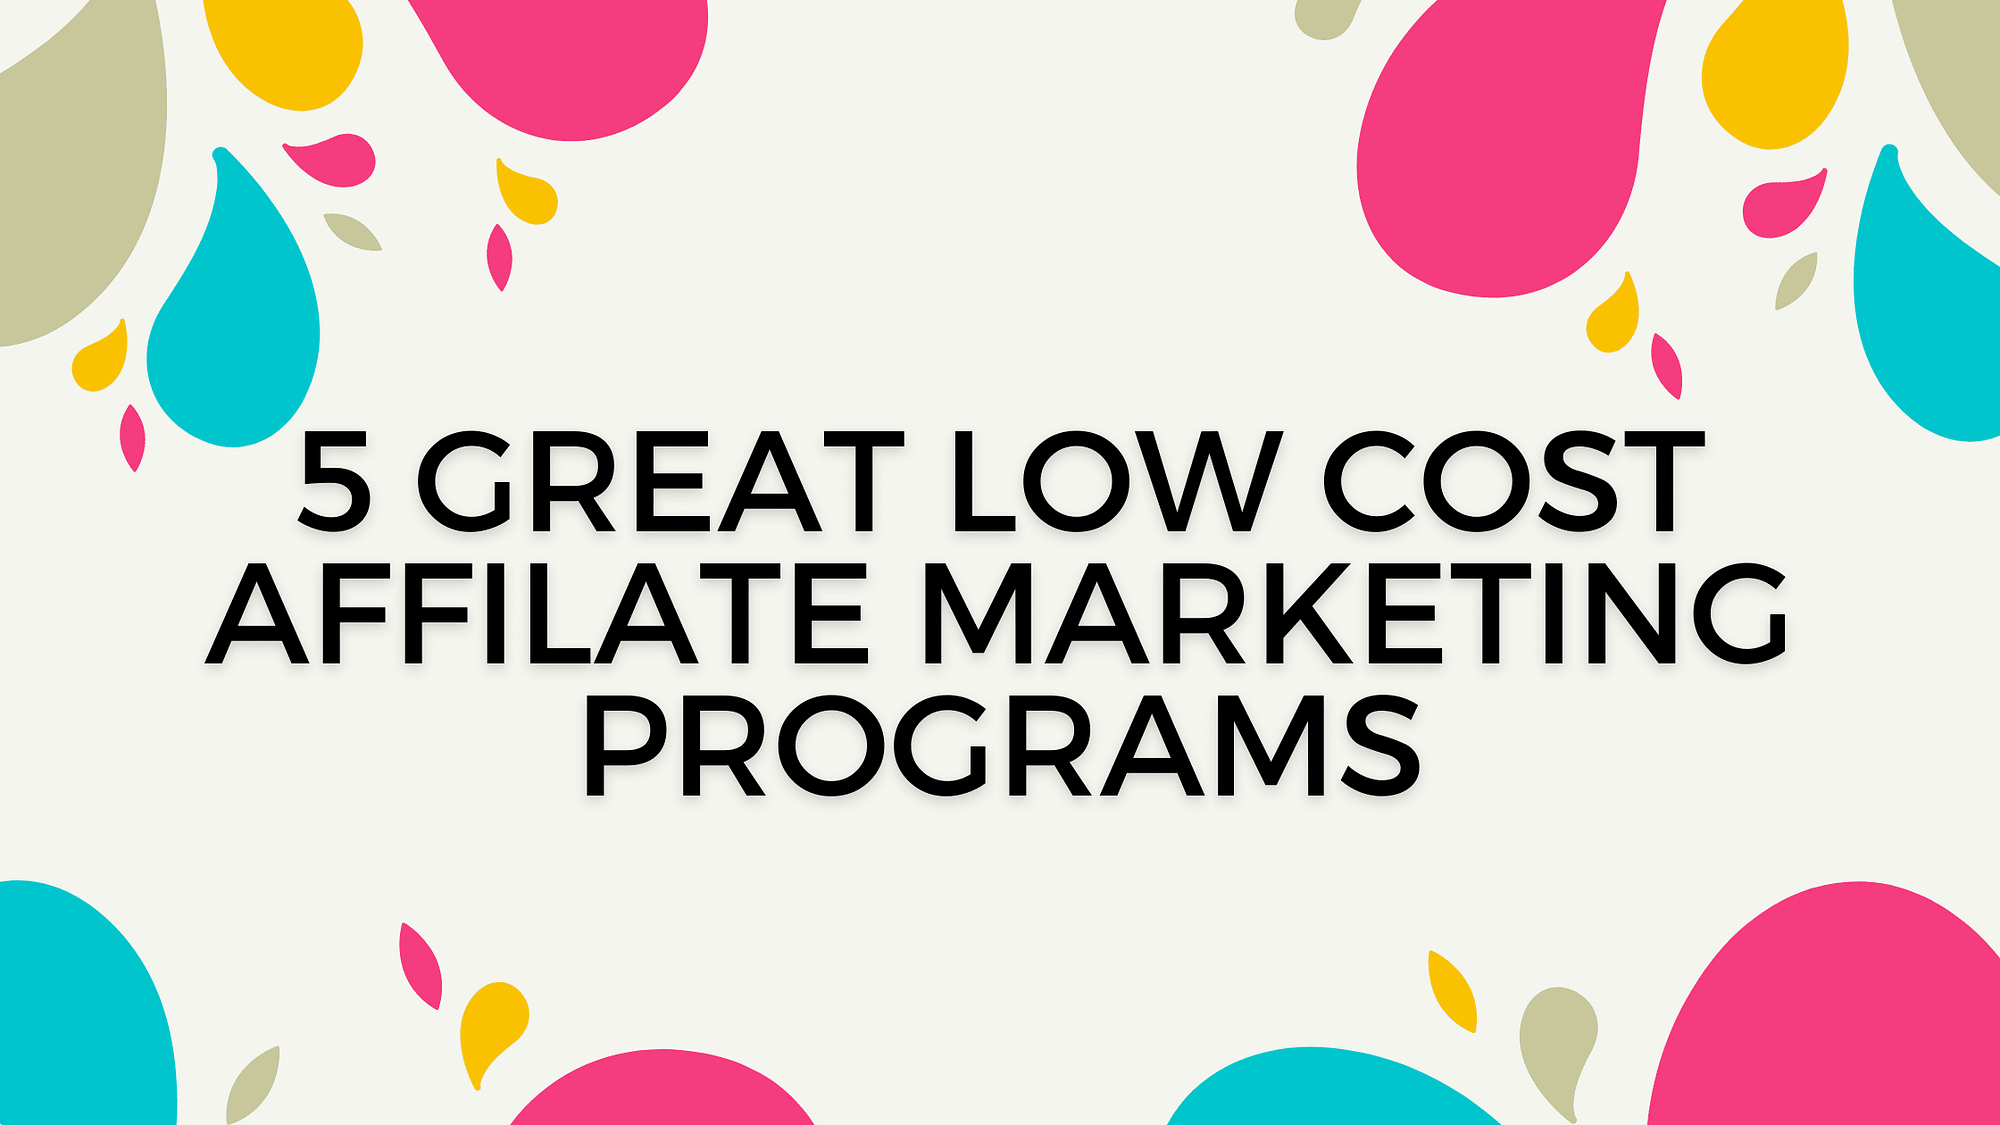 5 great low cost affiliate marketing programs